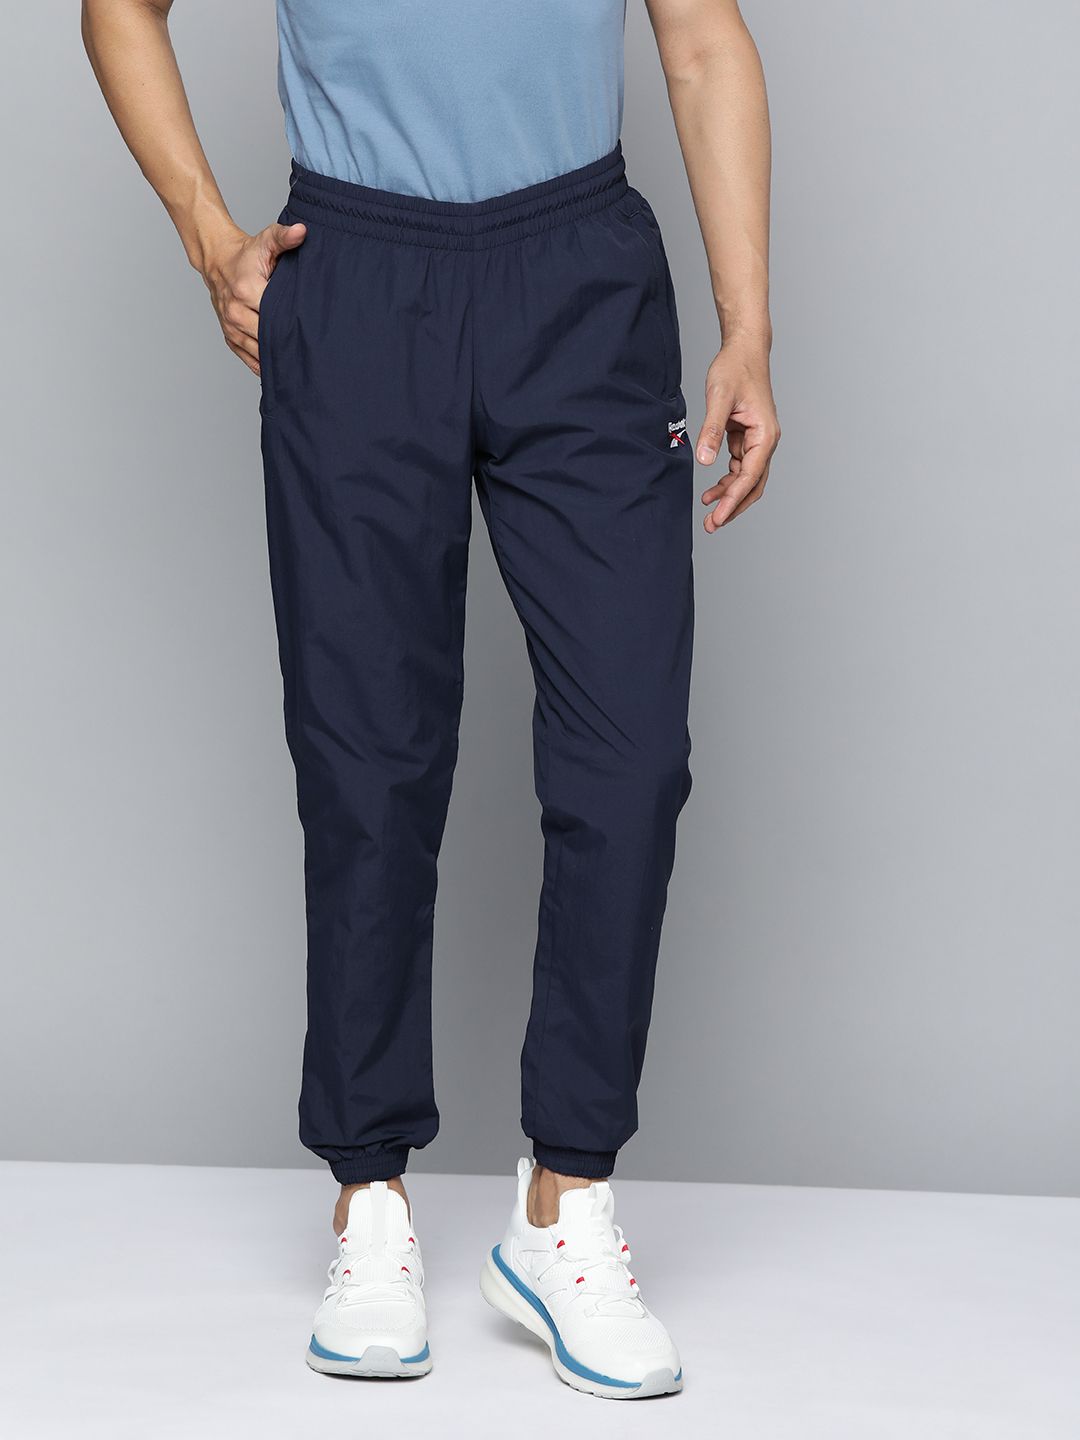 Reebok Classic Unisex Navy Blue Slim Fit Joggers Price in India